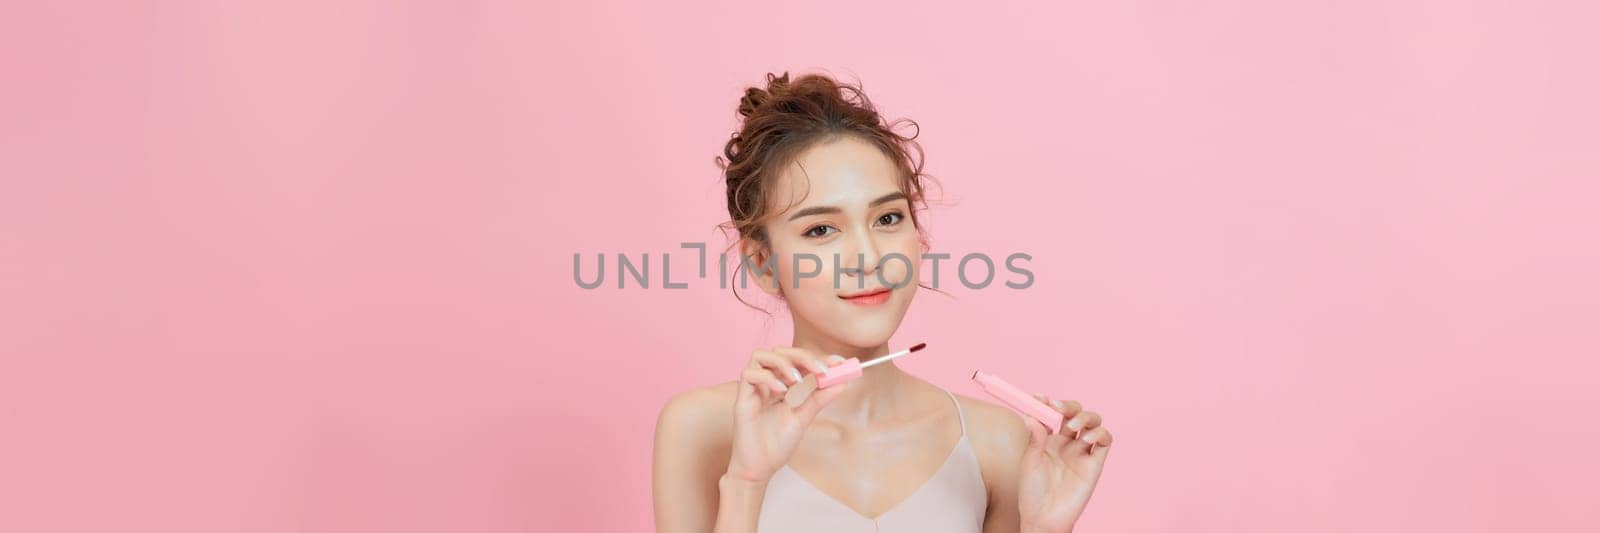 Photo of shirtless woman posing with lipstick, isolated studio background.